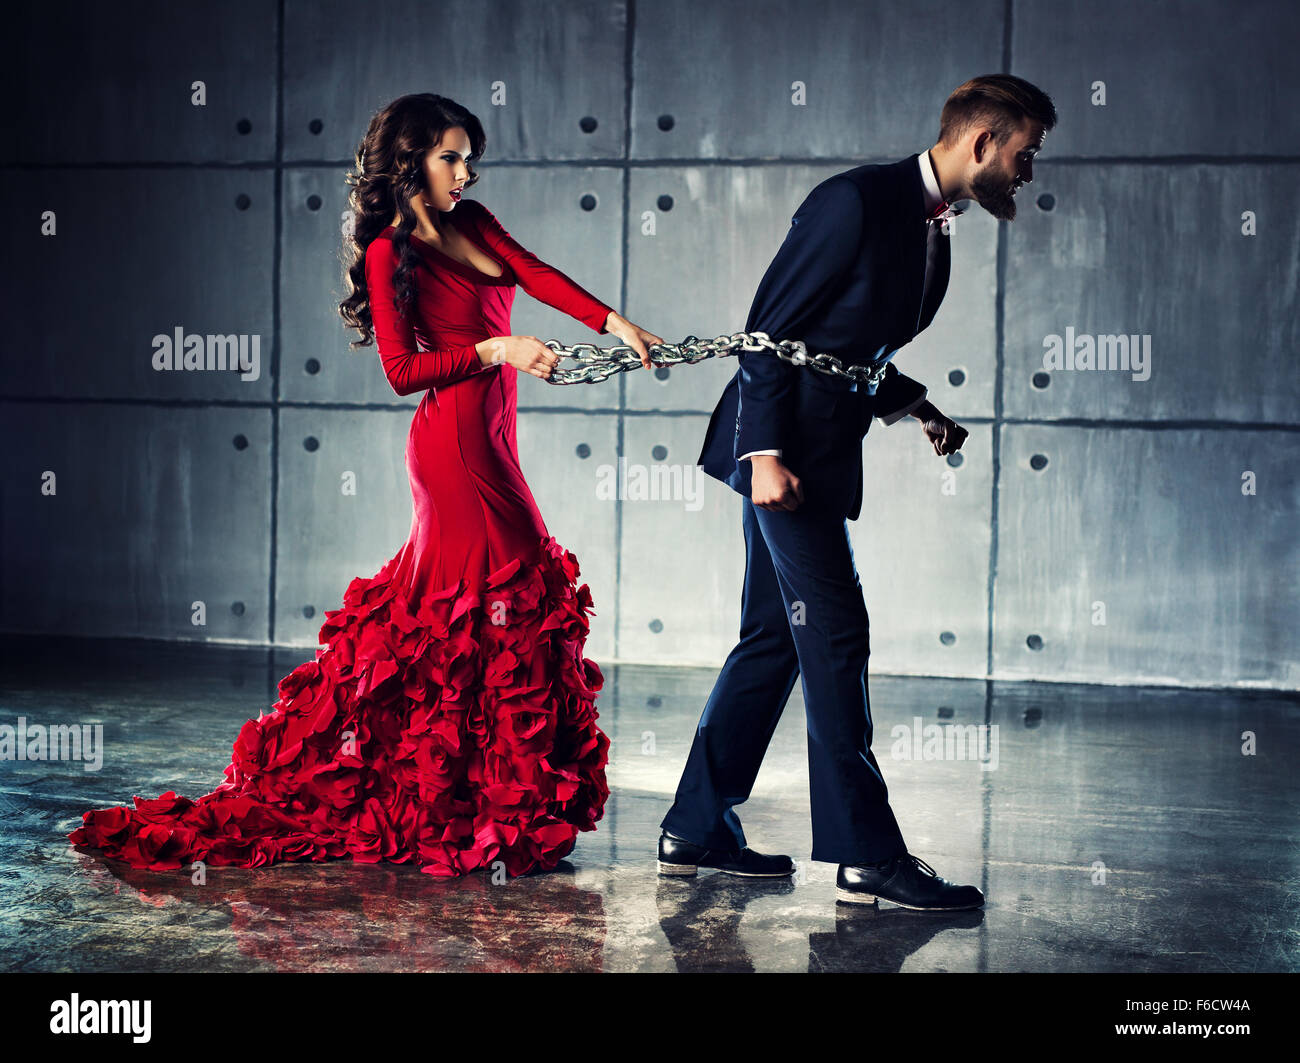 Young woman in red dress holding man on heavy chain. He tries to escape. Elegant evening clothing. Stock Photo